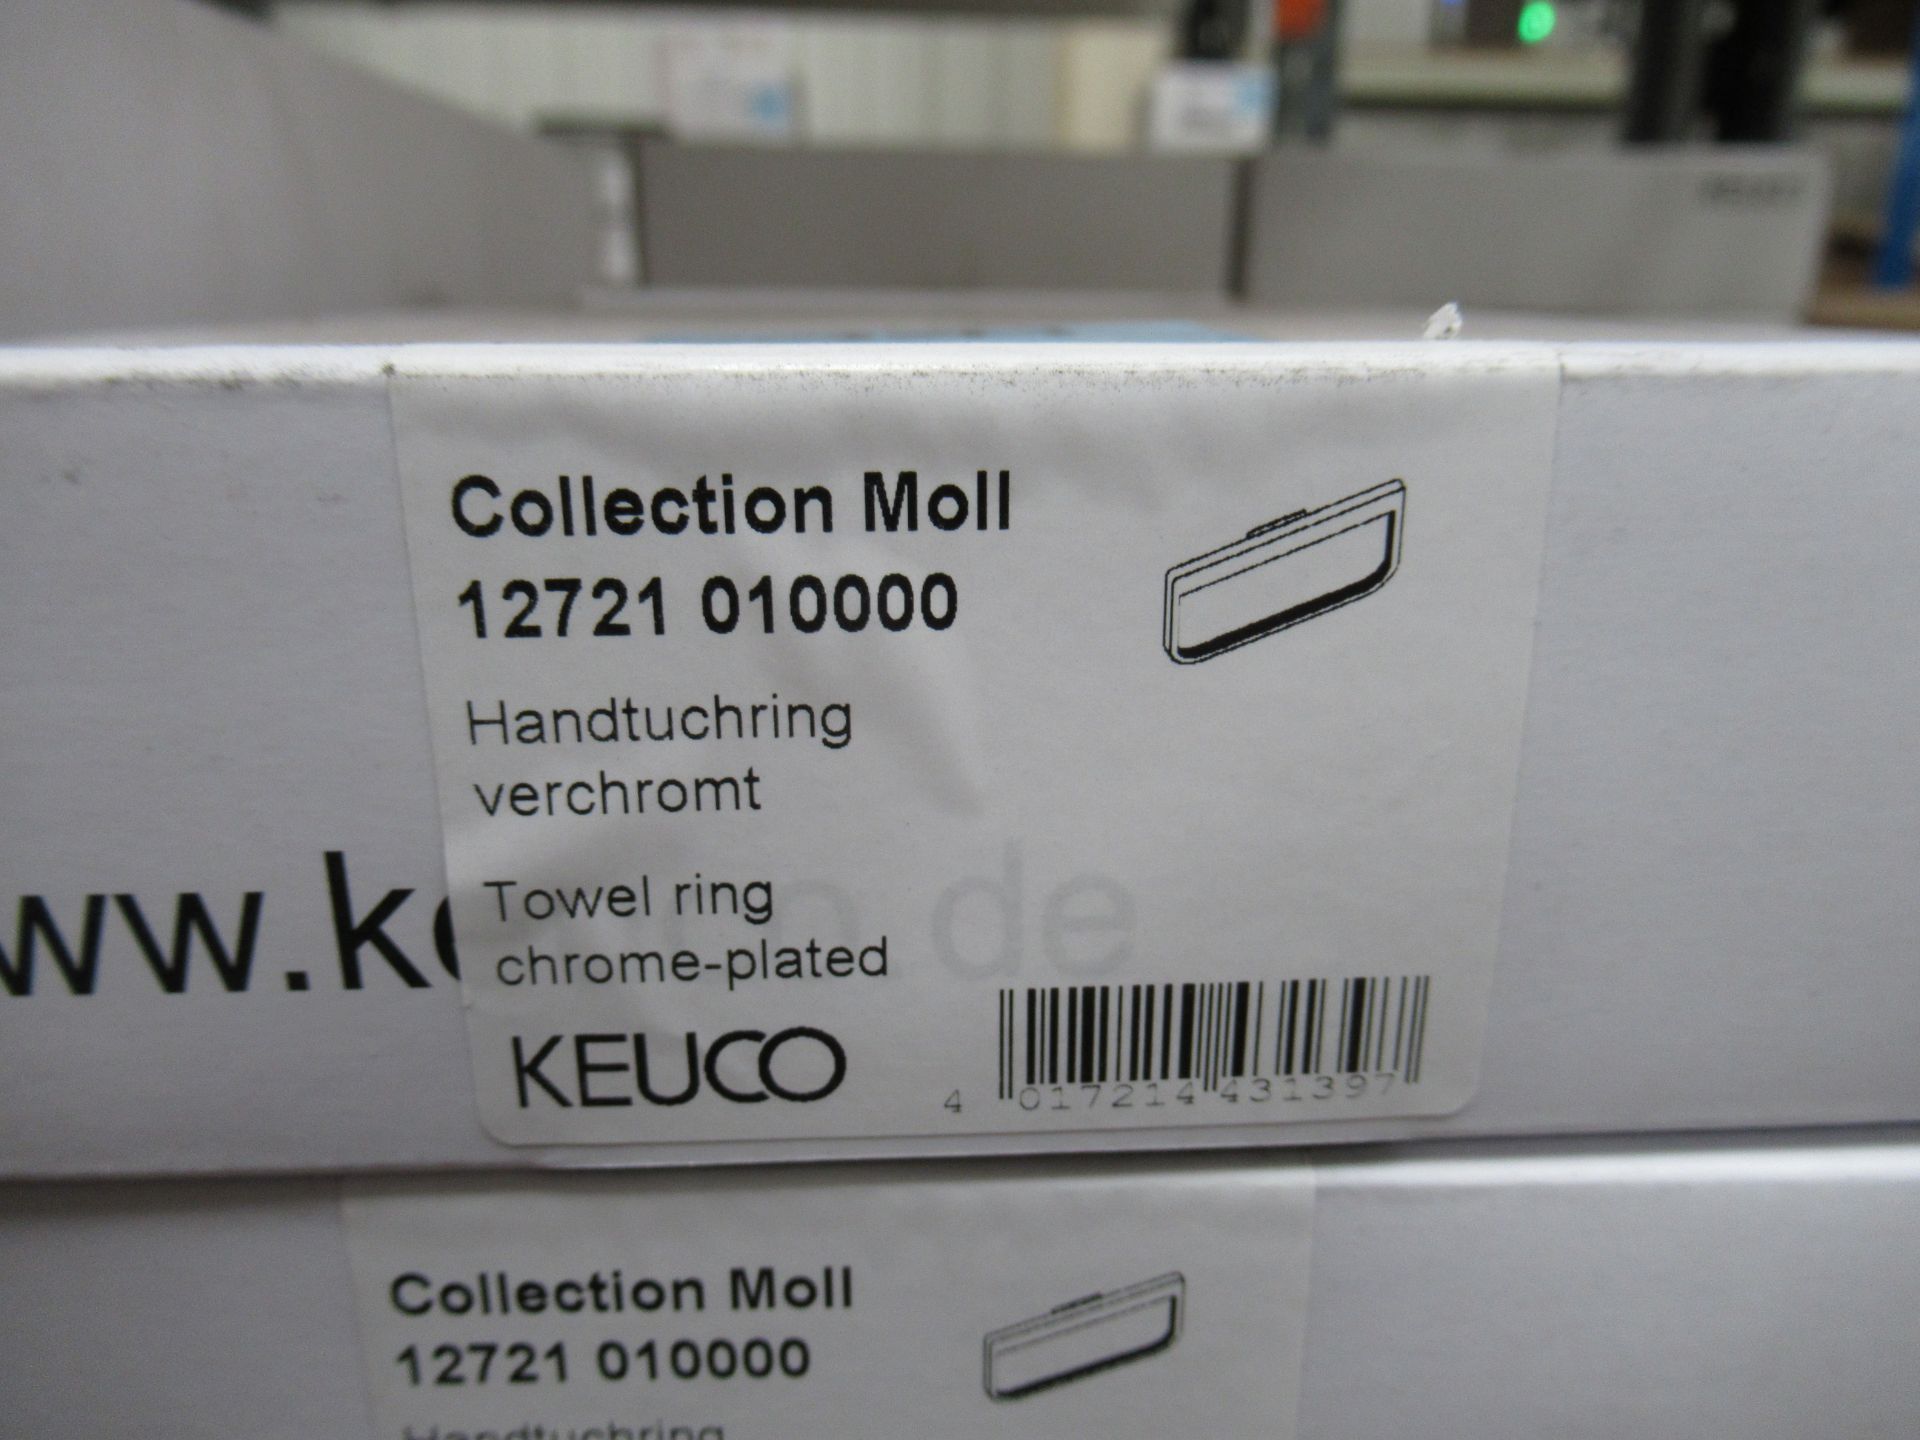 2 x Keuco Collection Moll Towel Rings, Chrome Plated, P/N 12721-010000 - Image 2 of 2